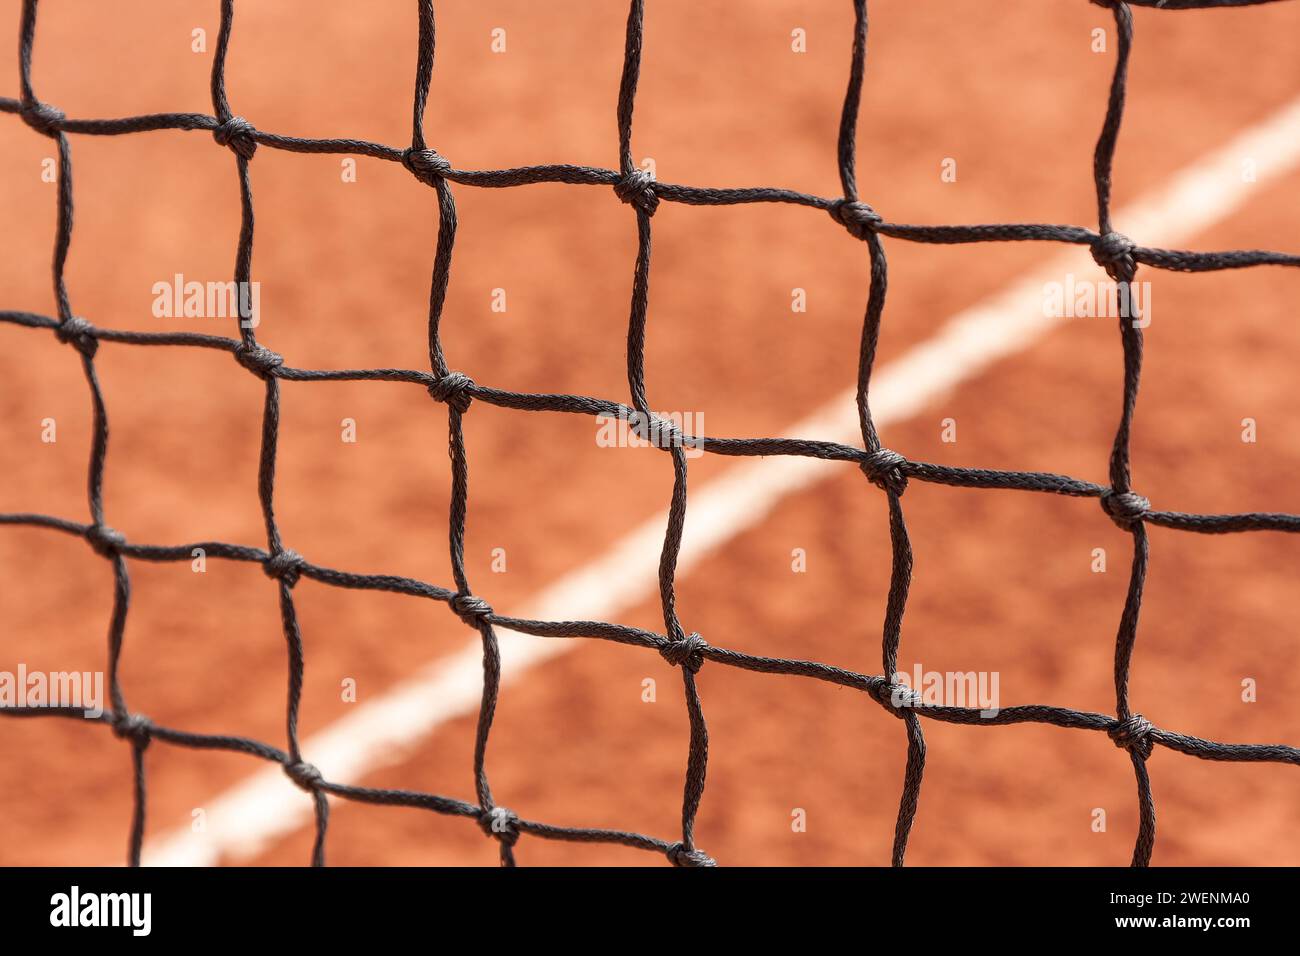 Tennis net. Close-up view of the nodes of a sports net against the background of a court with a ground surface Stock Photo